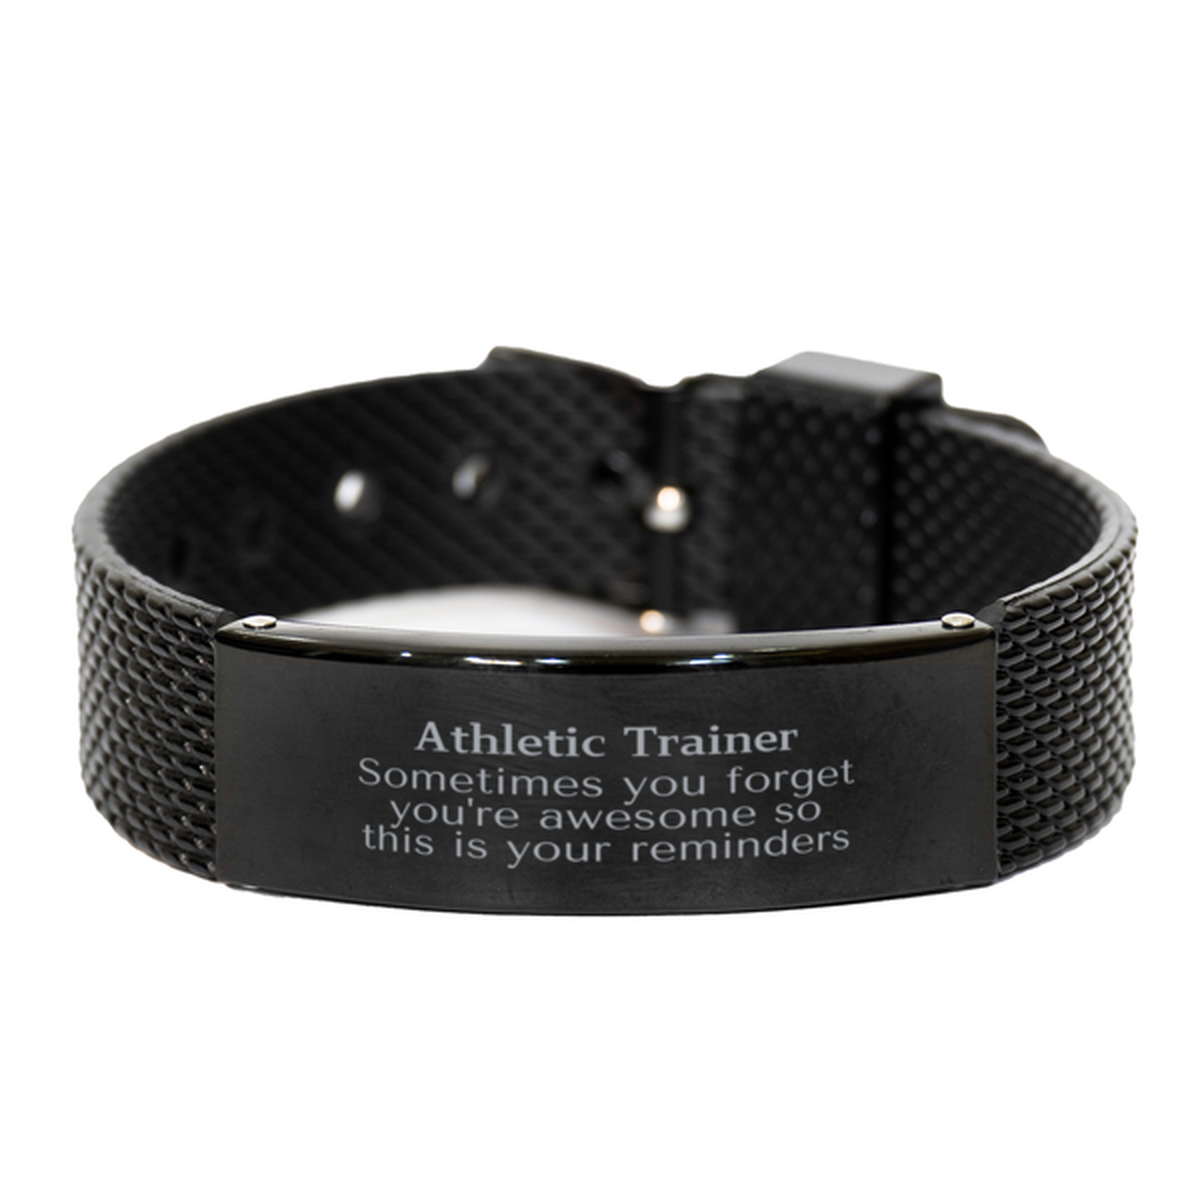 Sentimental Athletic Trainer Black Shark Mesh Bracelet, Athletic Trainer Sometimes you forget you're awesome so this is your reminders, Graduation Christmas Birthday Gifts for Athletic Trainer, Men, Women, Coworkers